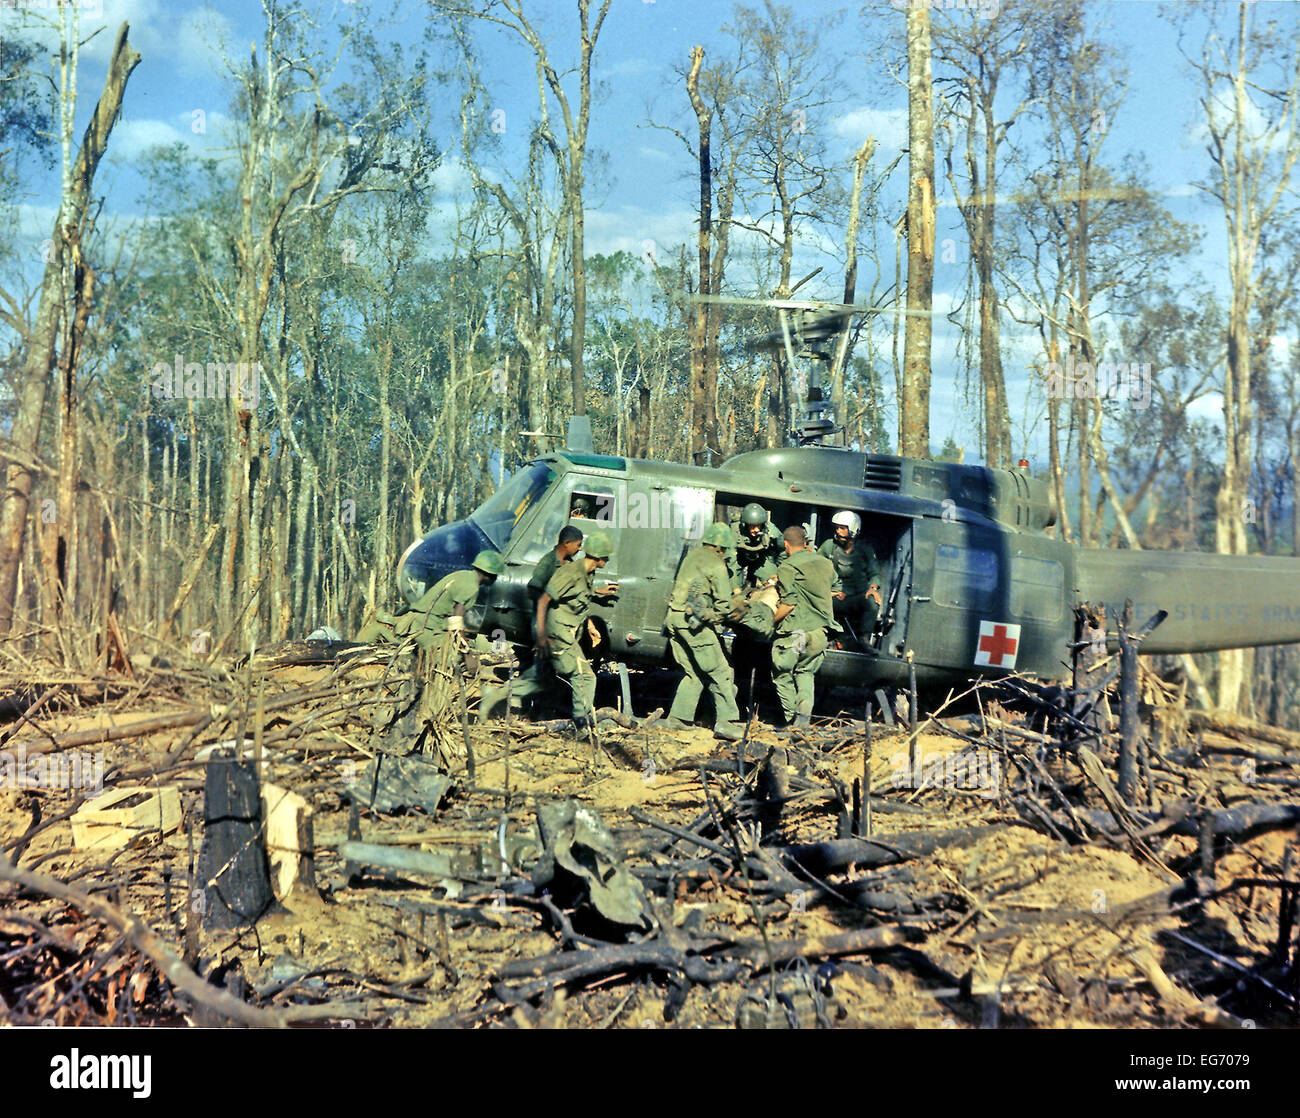 Members of the Fourth Batallion, 173rd Airborne Brigade, load the wounded aboard a UH-1D helicopter for evacuation after the assault on Hill 875, located 15 miles west of Dak To, Vietnam on November 23, 1967. Foto: Alfred Batungbacal - U.S. Army    (c) dpa - Report    Stock Photo